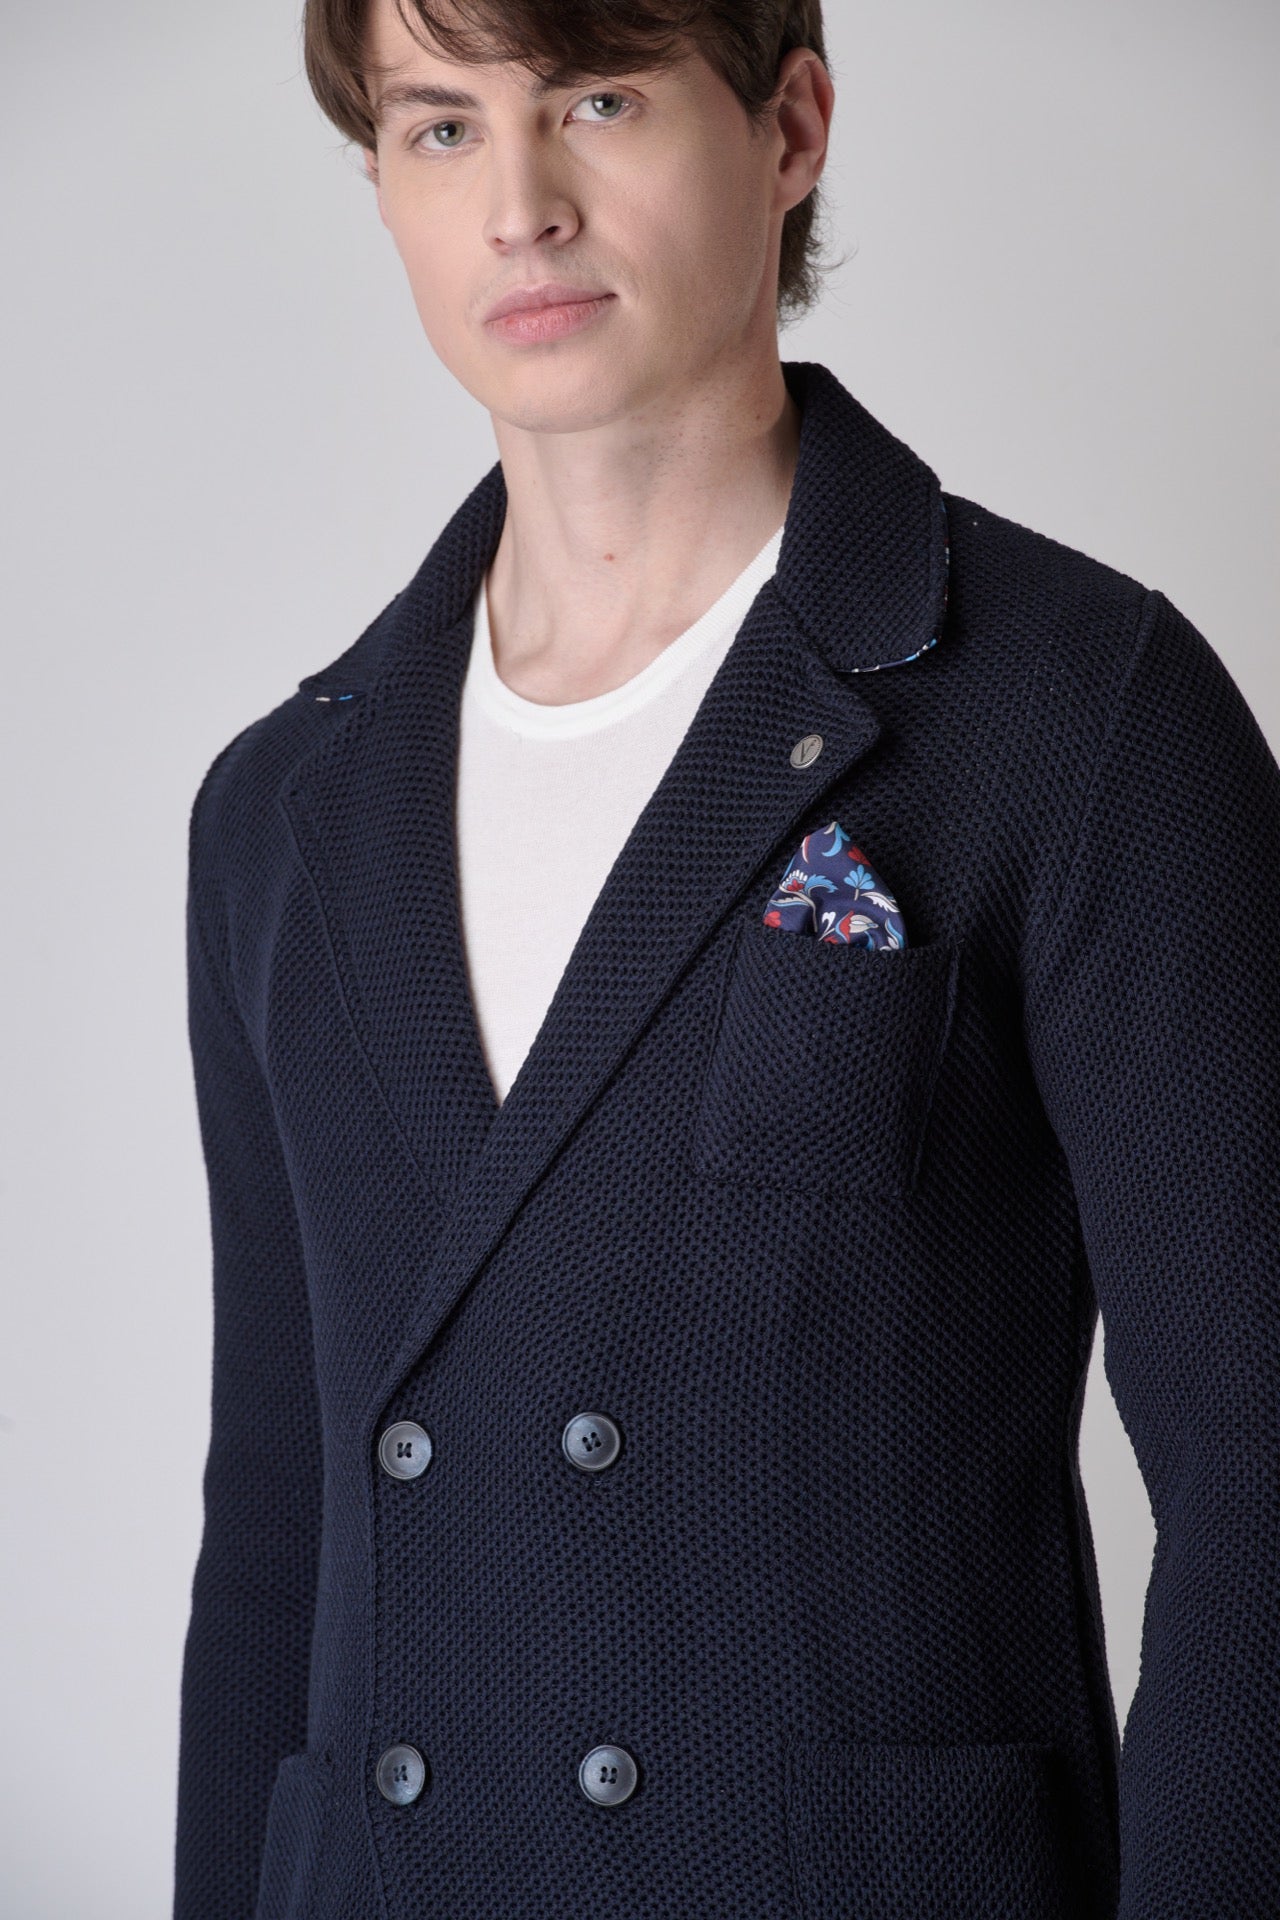 Blue Bird's Eye Double-breasted Jacket with inner collar and pocket square in V2 fabric